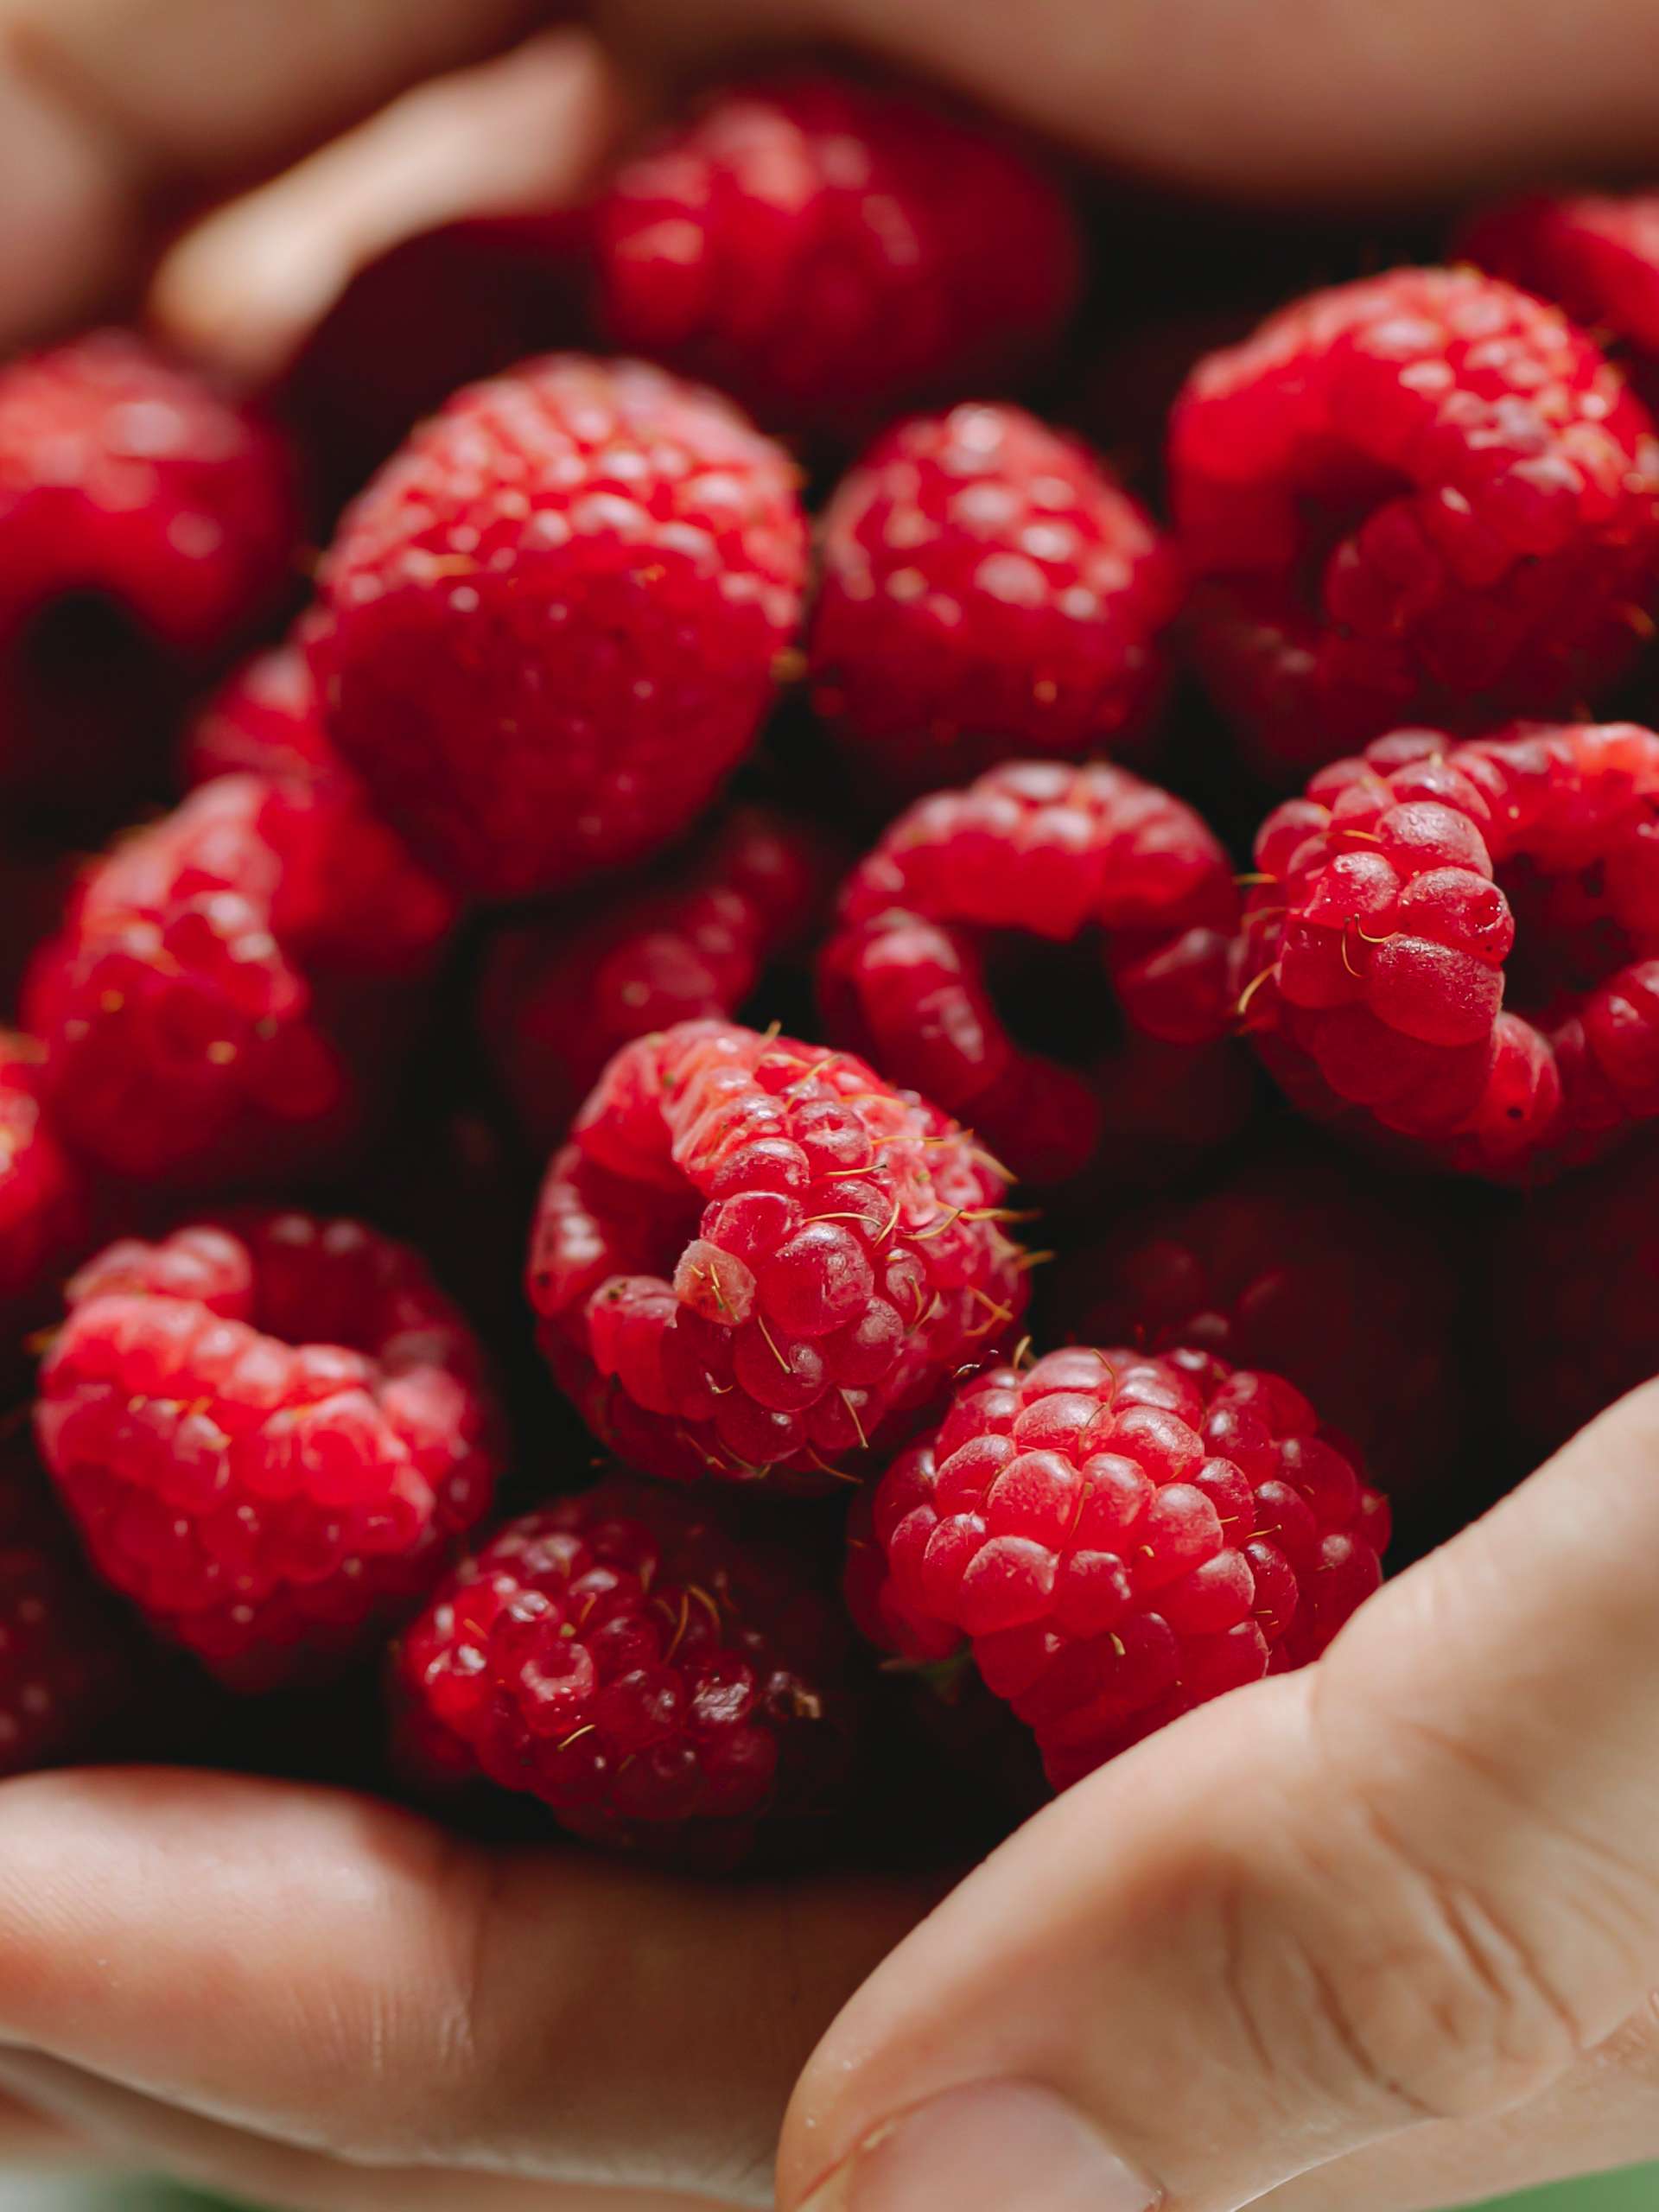 5 Reasons to Add More Raspberries To Your Diet